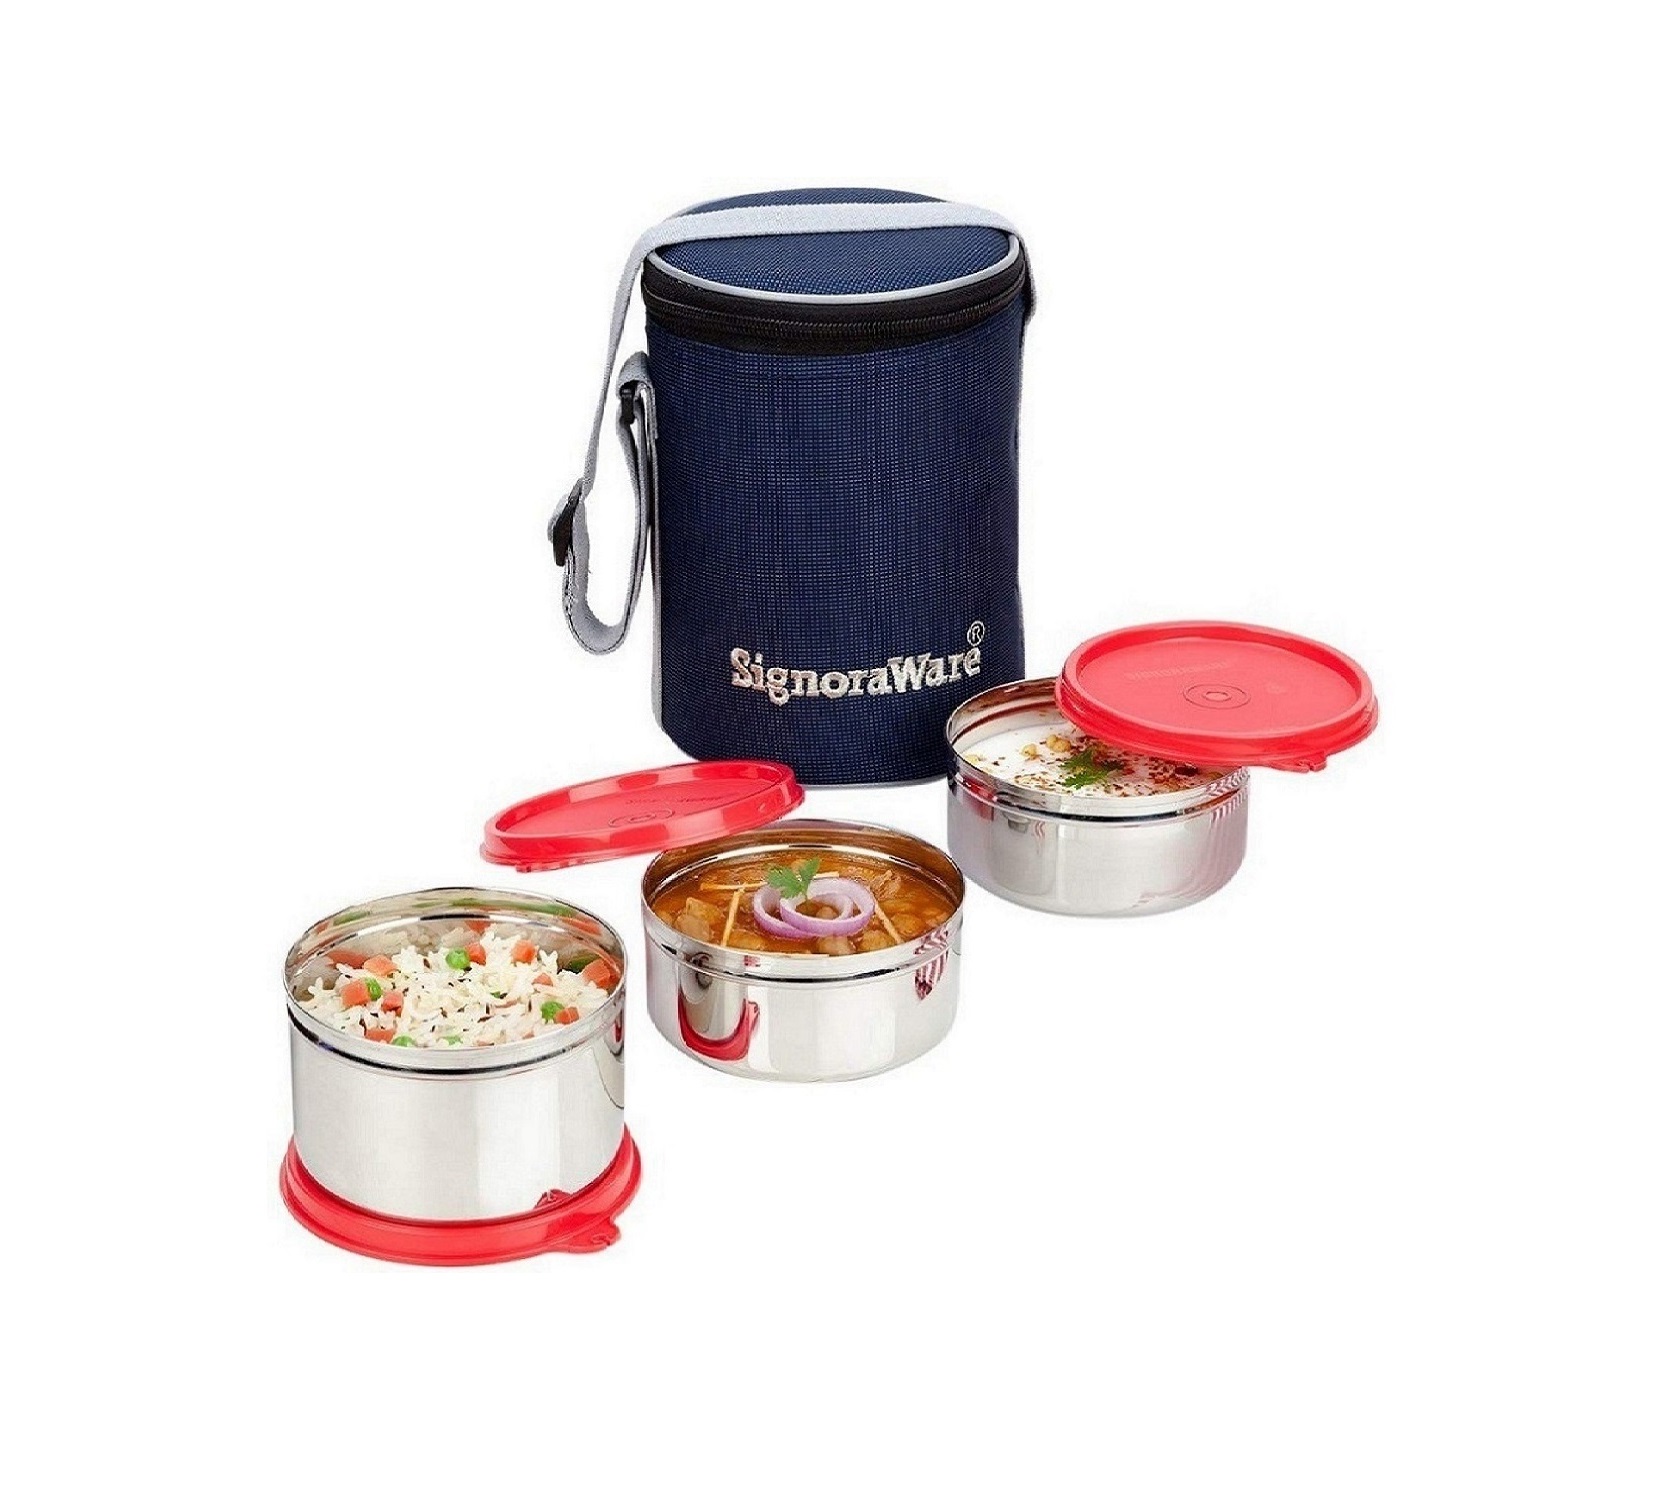 SignoraWare Executive Stainless Steel Lunch Box